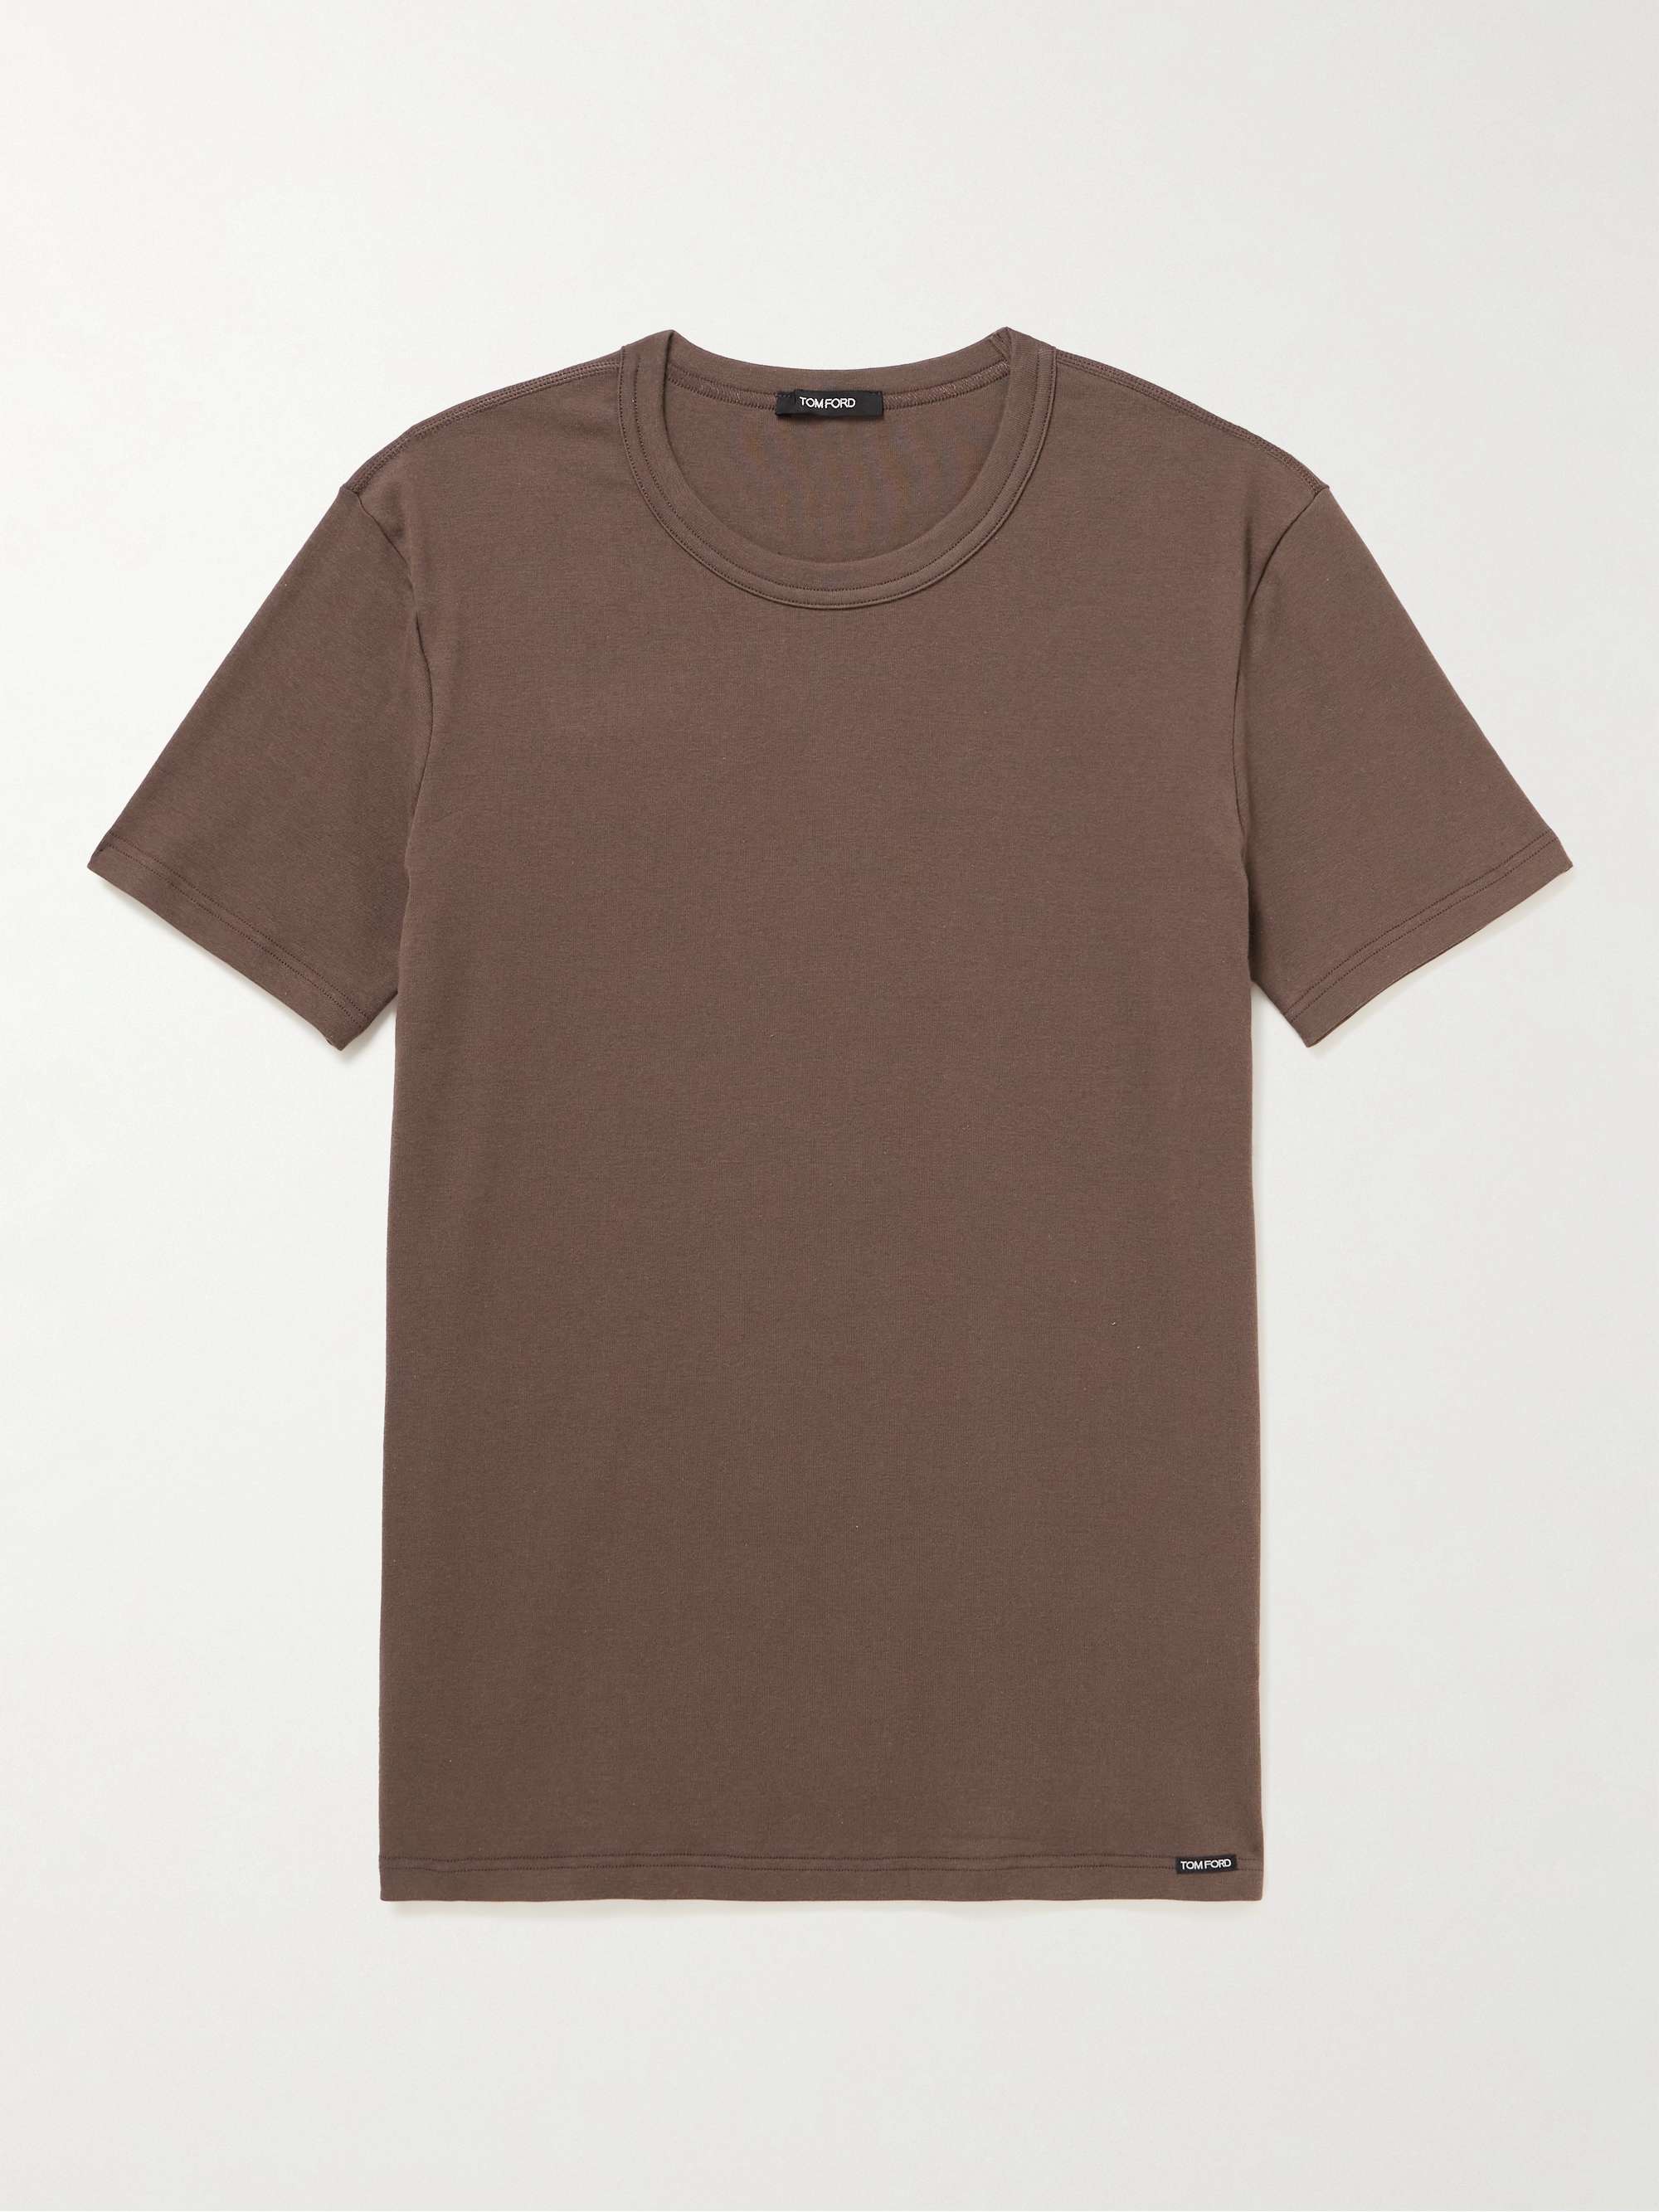 TOM FORD Slim-Fit Stretch-Cotton Jersey T-Shirt